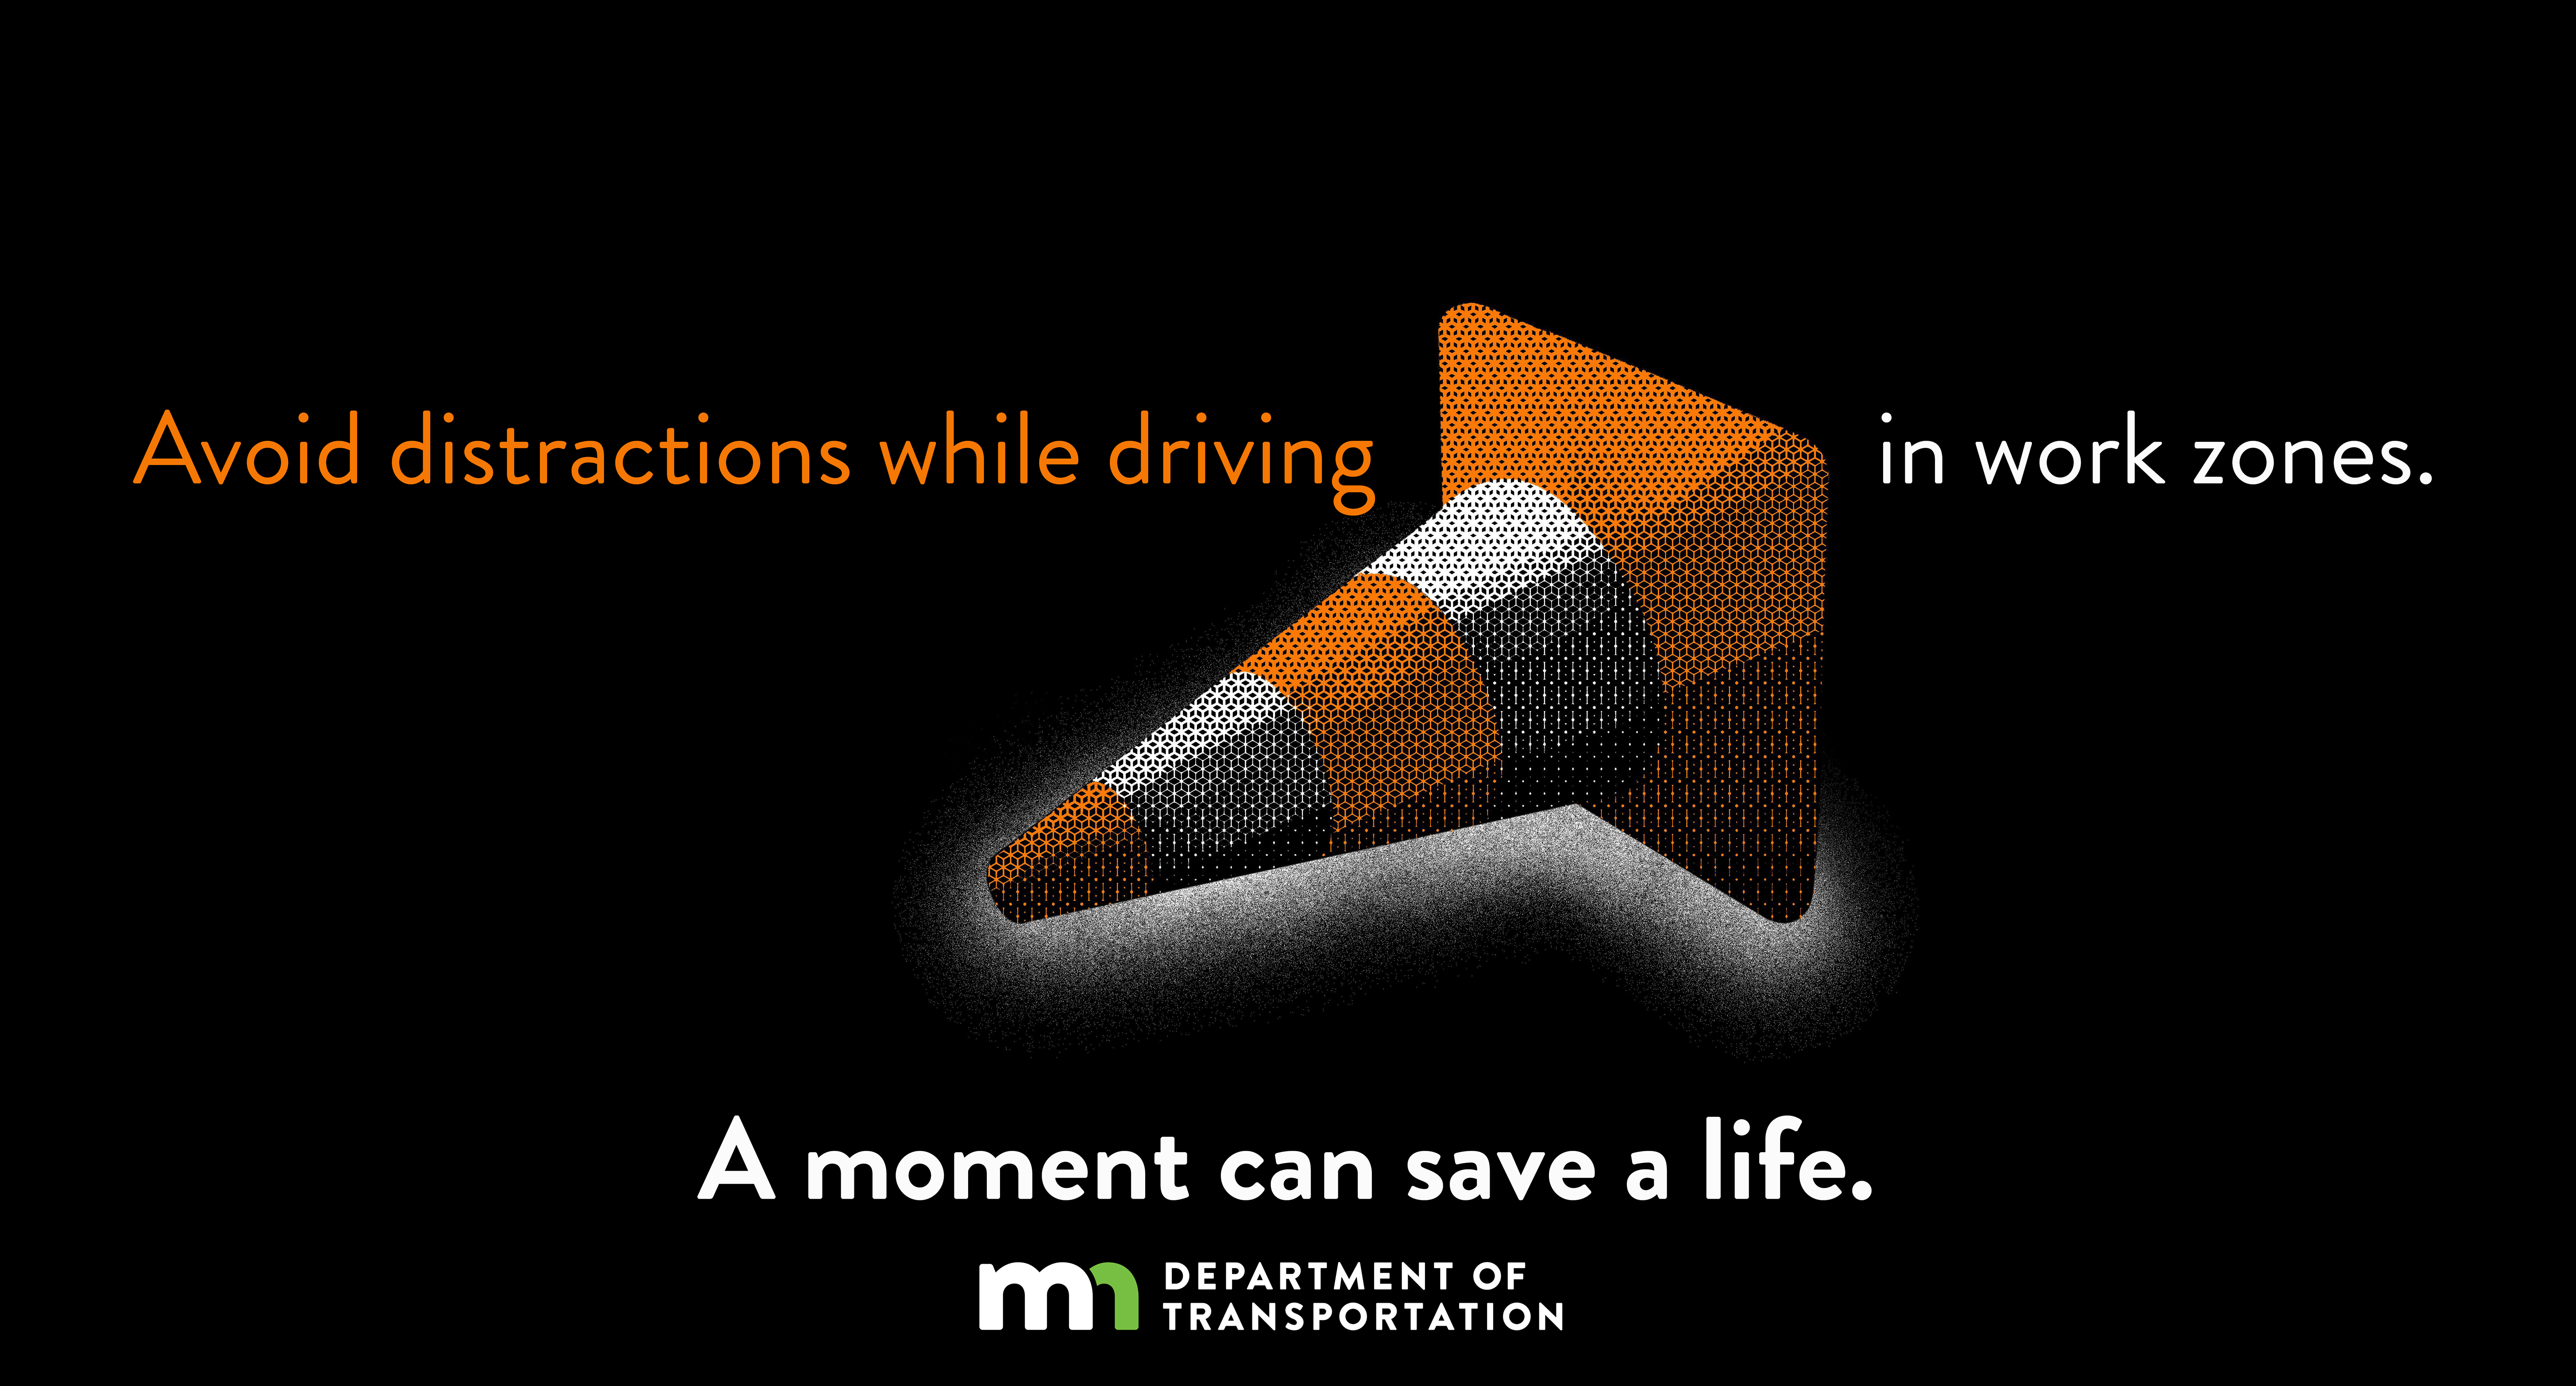 Work zone safety is everyone's job. A moment can save a life.